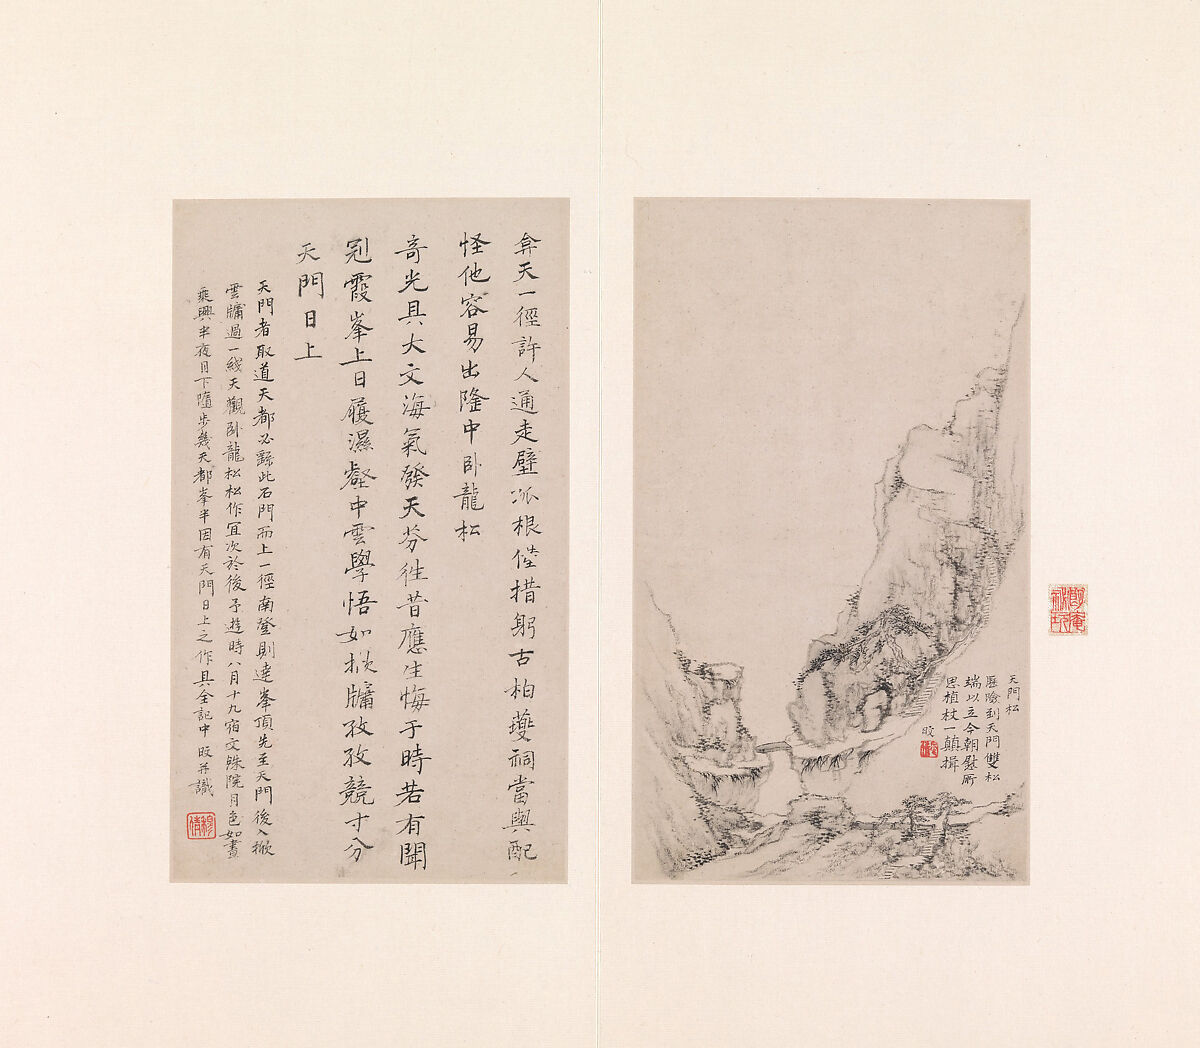 Eight views of the Yellow Mountains, Zheng Min (Chinese, 1633–1683), Album of nine leaves of painting and calligraphy; ink on paper, China 